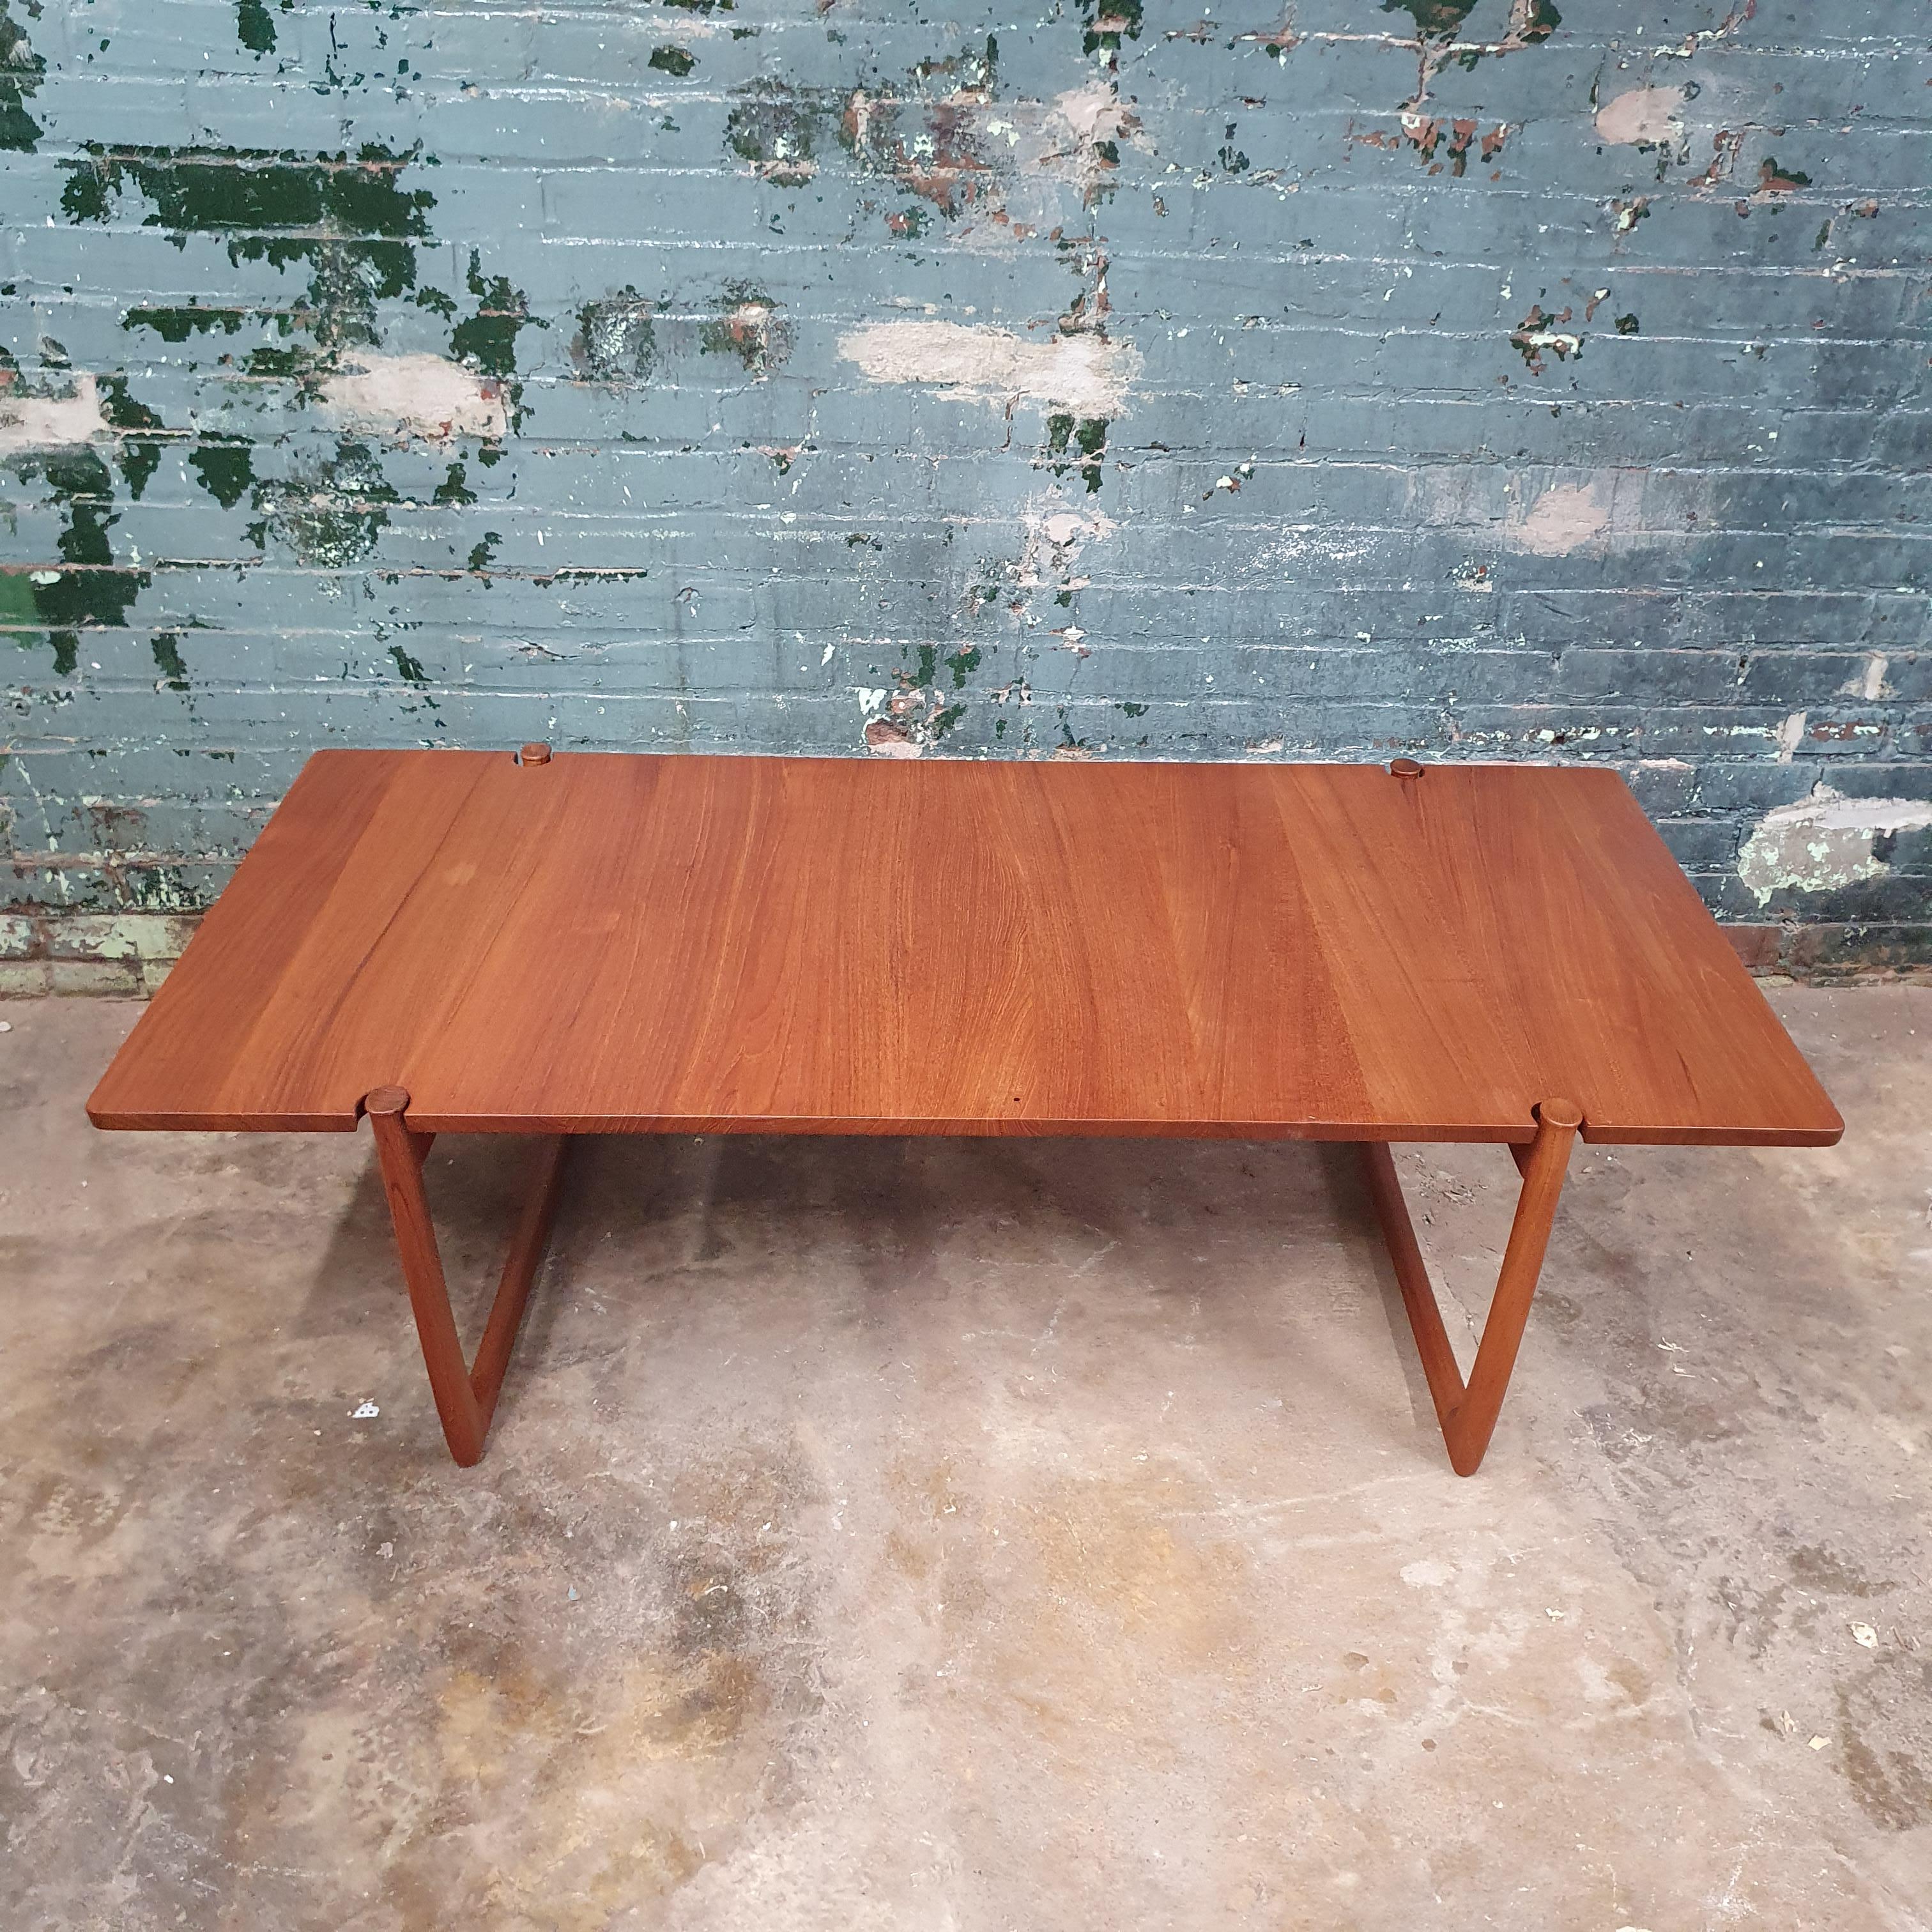 beautiful solid teak coffee table by peter hvidt and orla mølgaard-nielsen for France and sons. this table has beautiful details including the joinery joining the solid teak top visible in the end grain. sculpted legs with a great